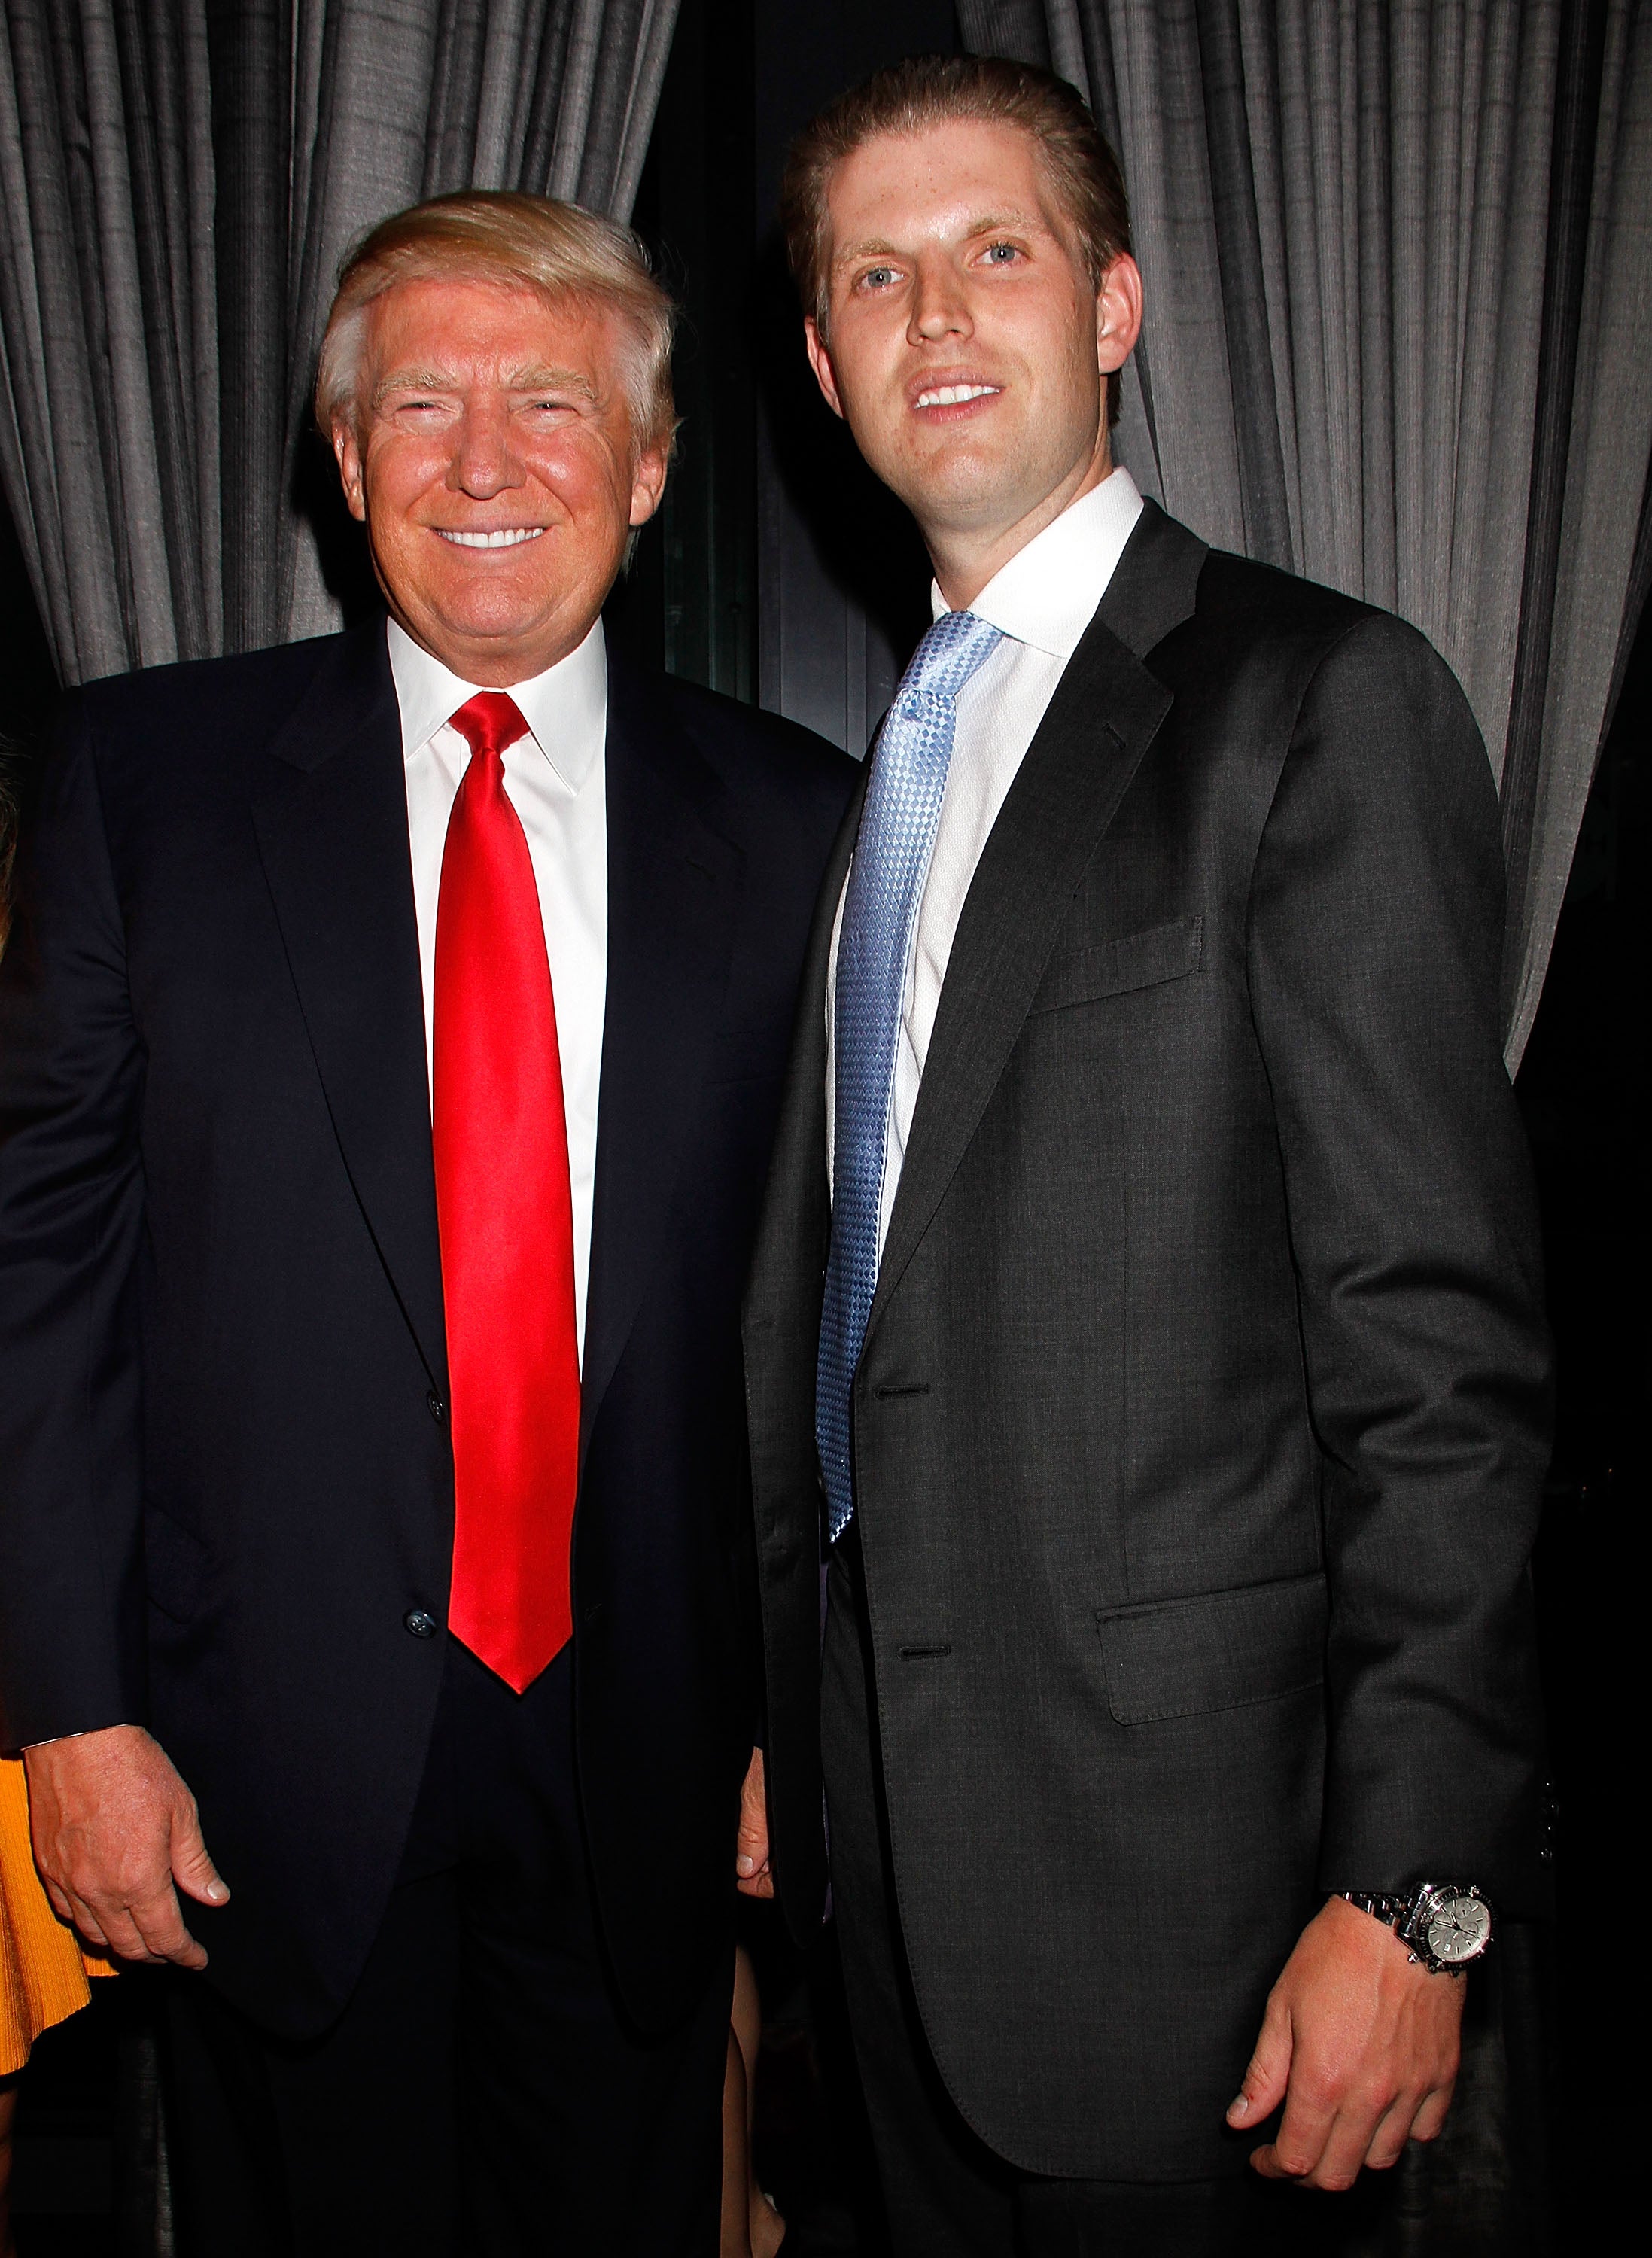 Donald Trump's Son Doesn't Think Democrats Are Human Beings
